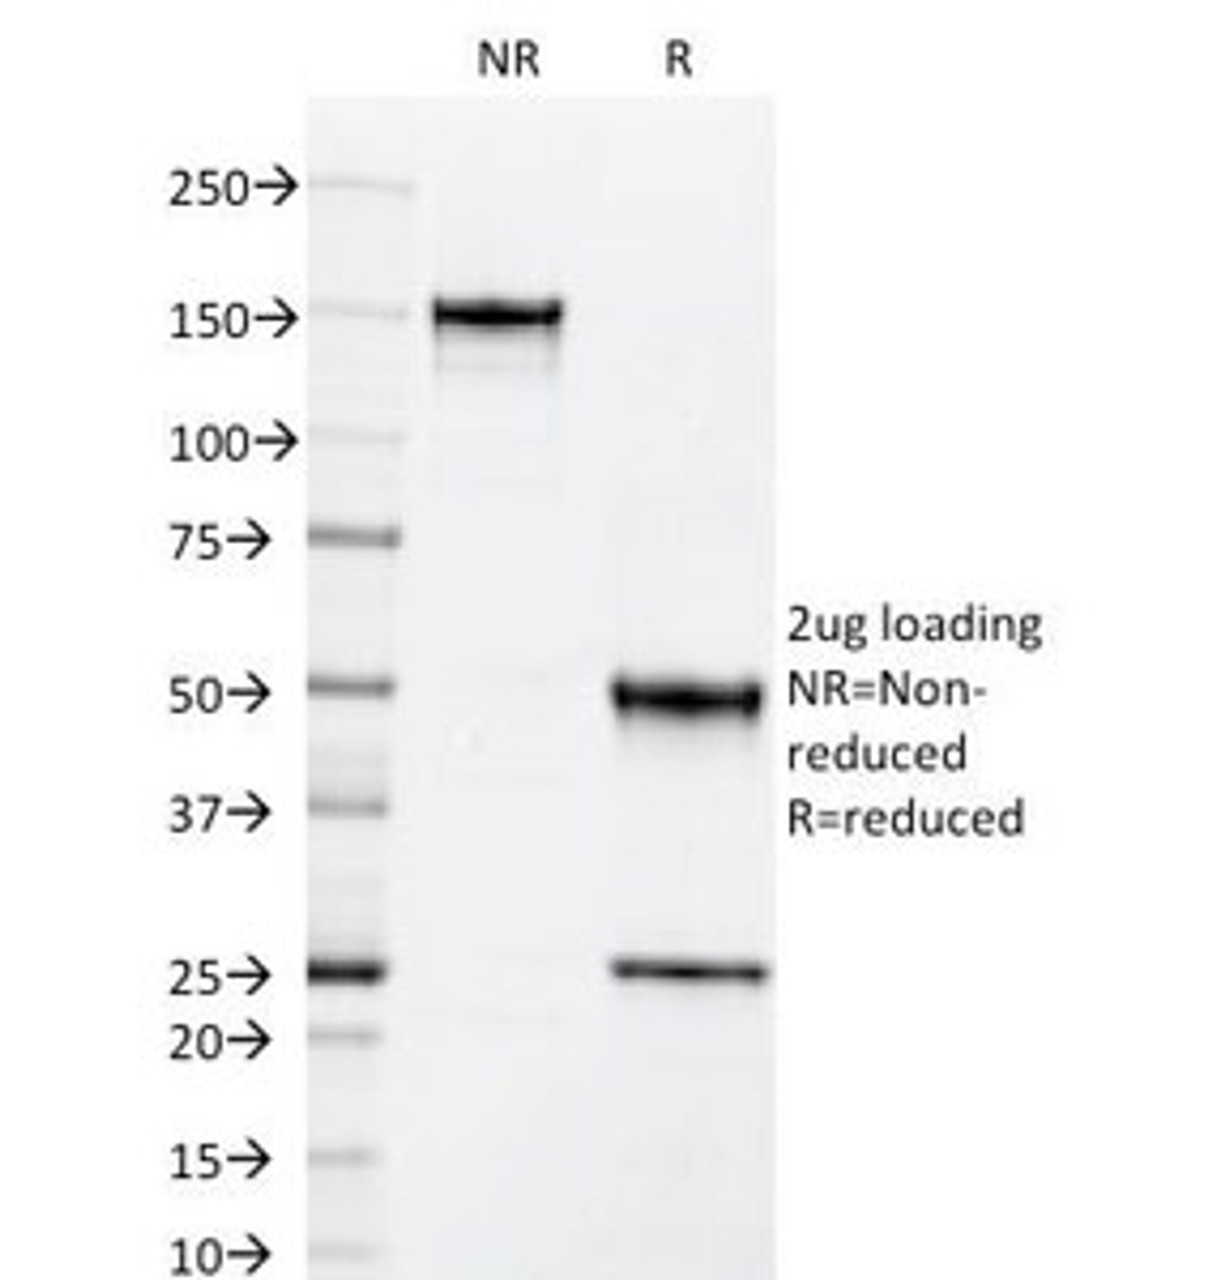 SDS-PAGE Analysis of Purified, BSA-Free ICAM-3 Antibody (clone 101-1D2) . Confirmation of Integrity and Purity of the Antibody.